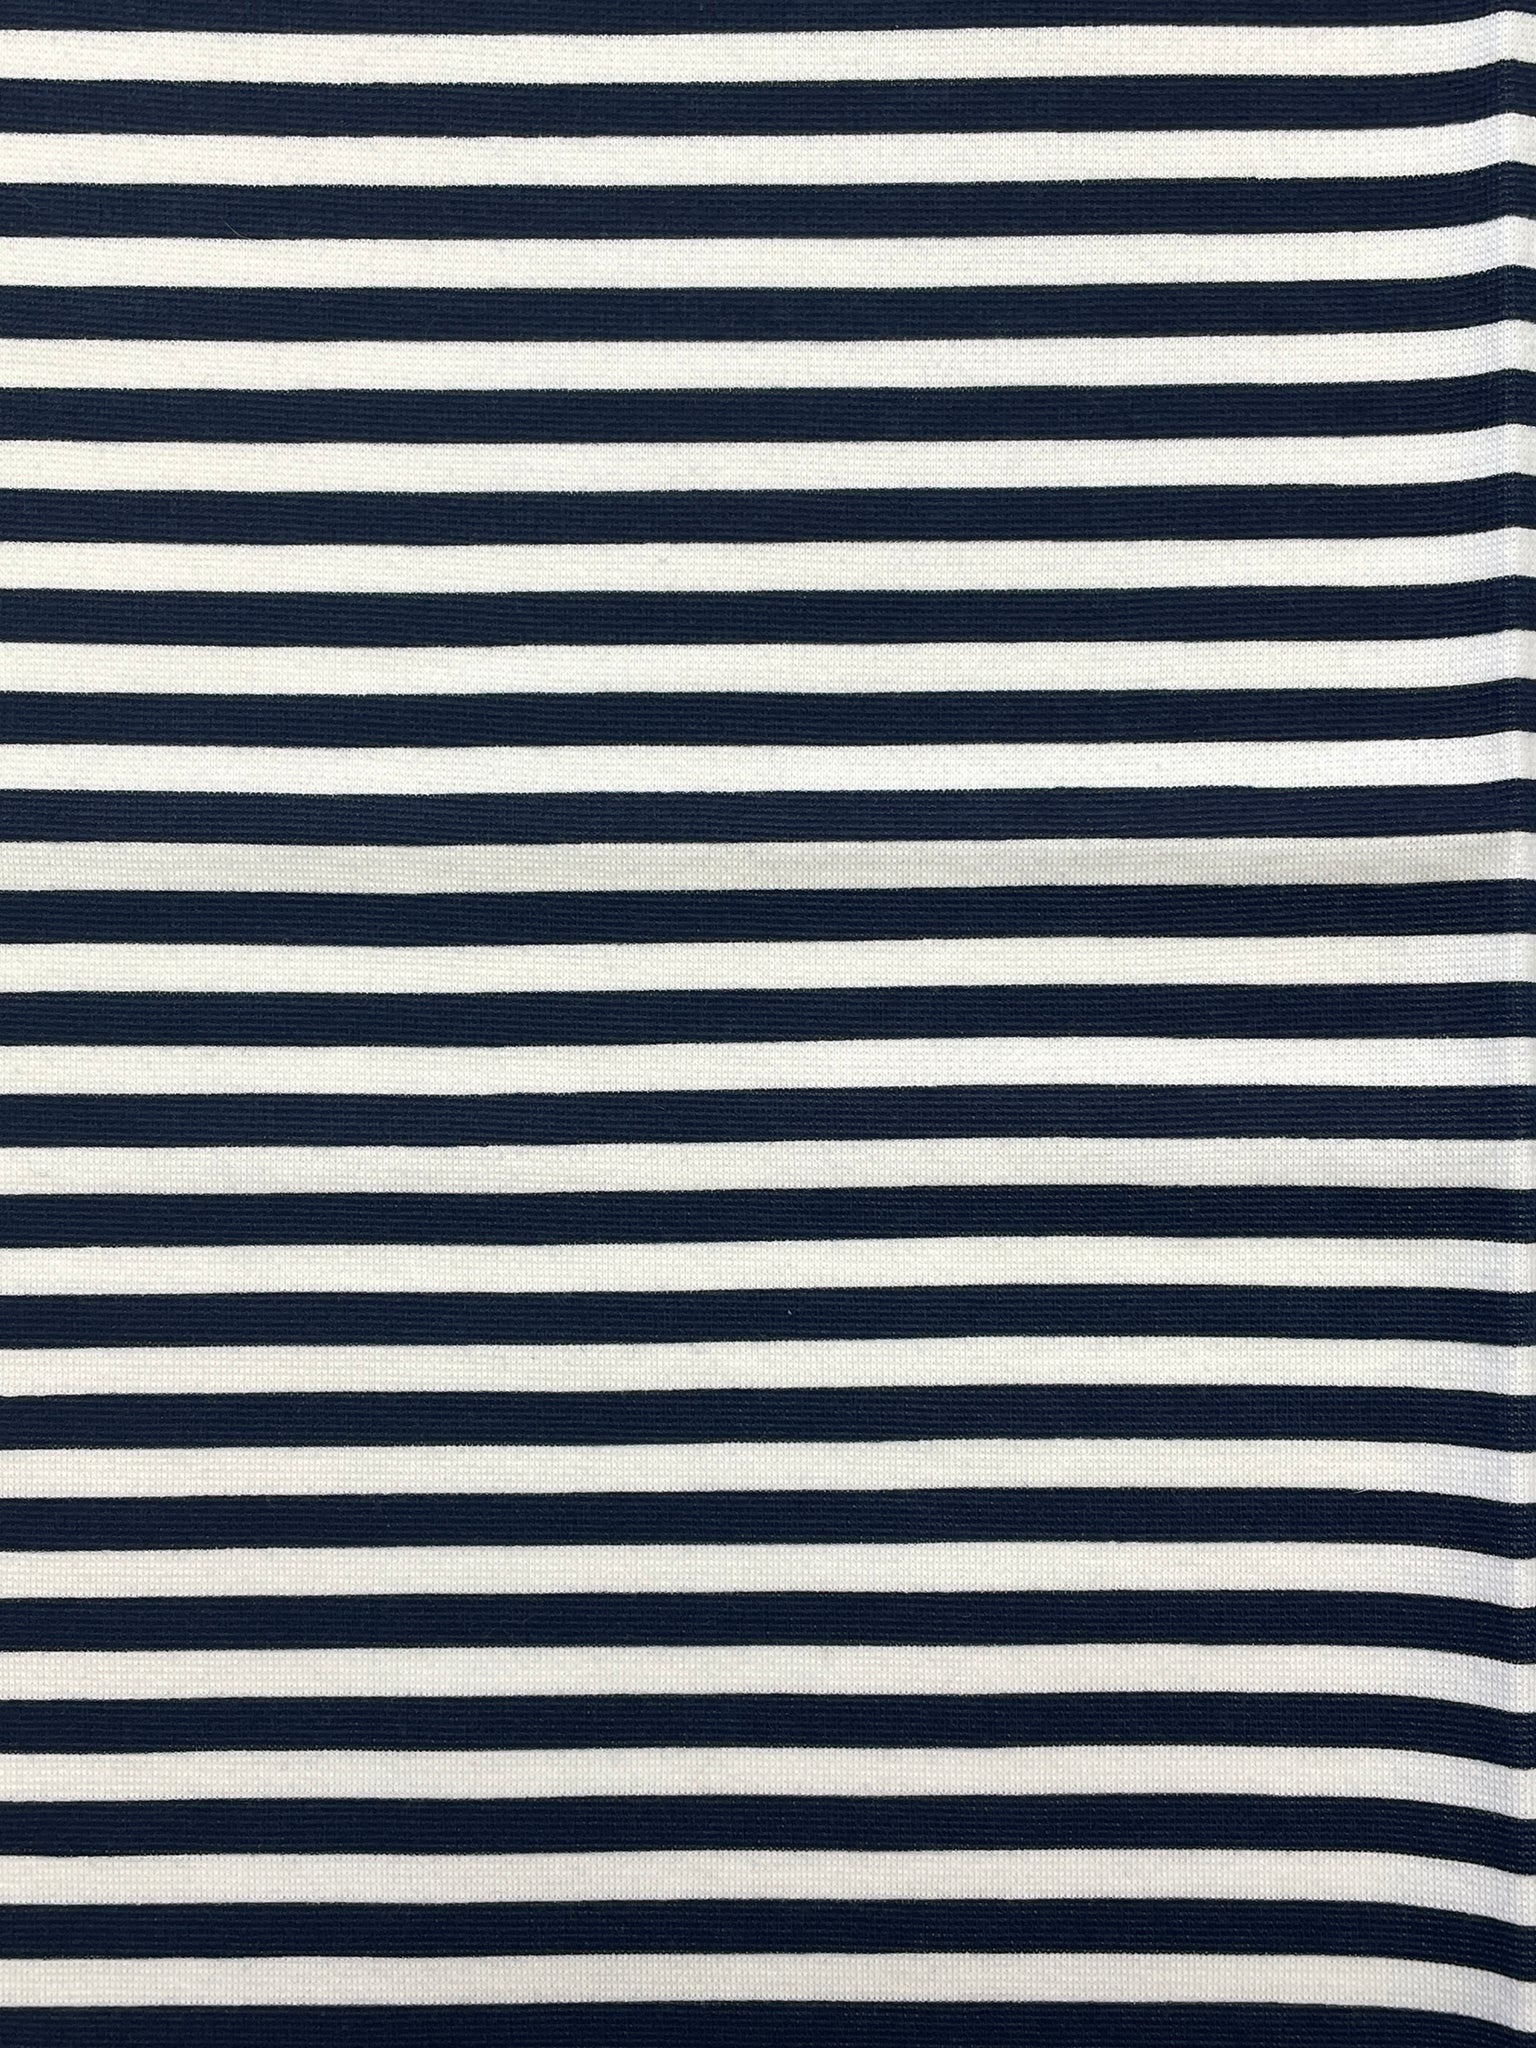 1 1/2 YD Cotton Blend Printed Stripe - White and Navy Blue